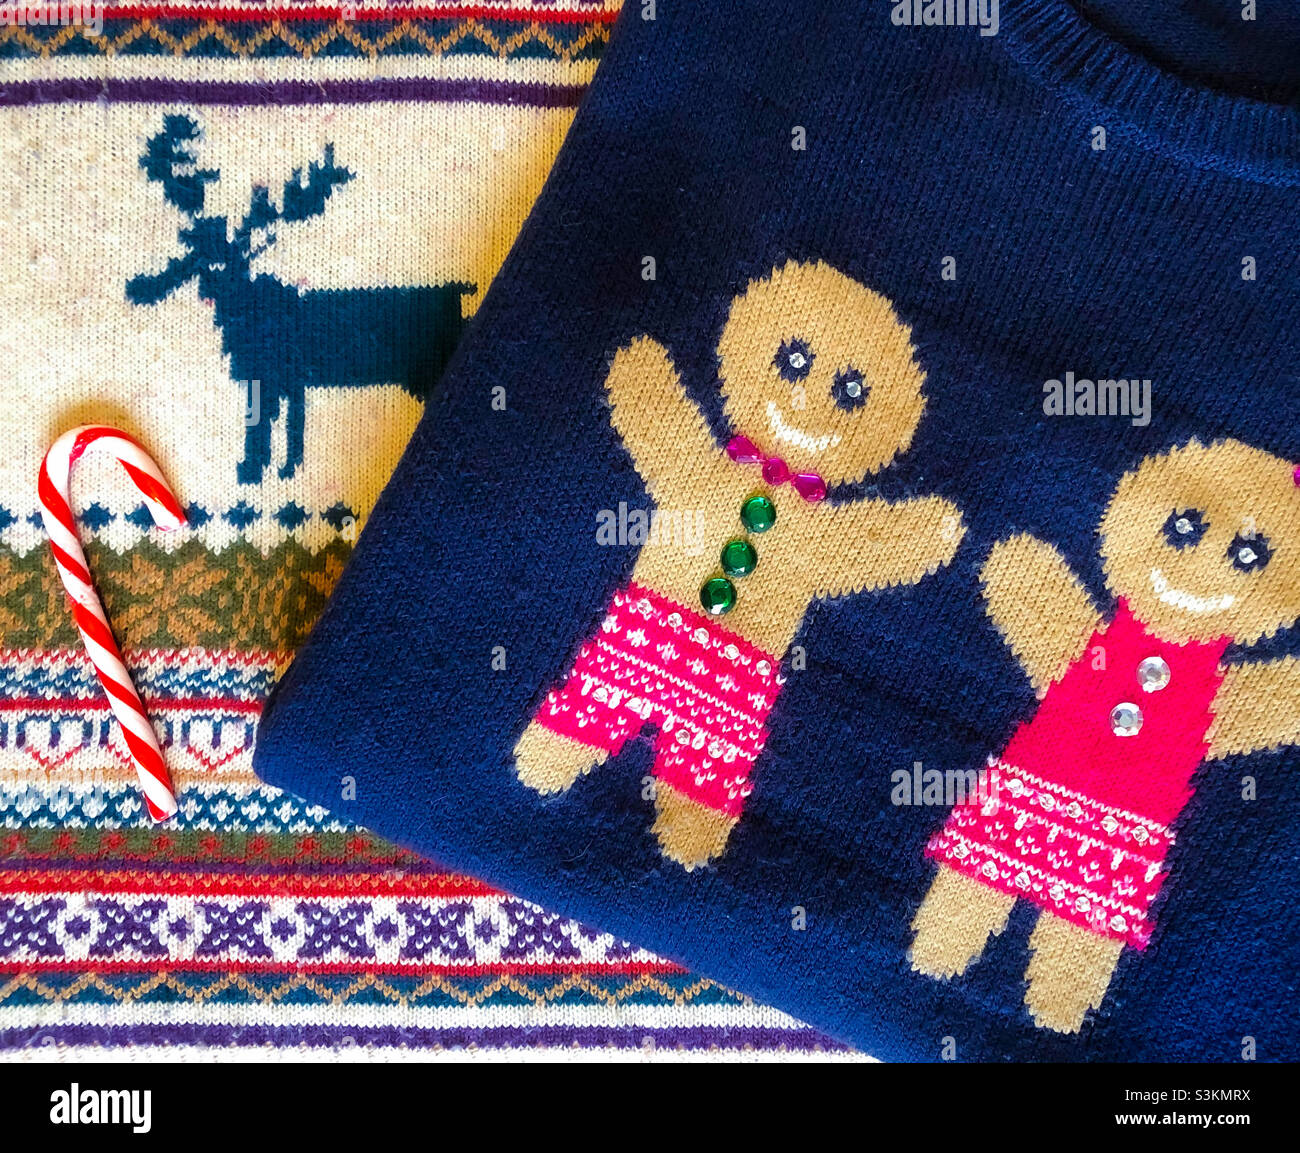 Christmas jumper flat lay with candy canes Stock Photo